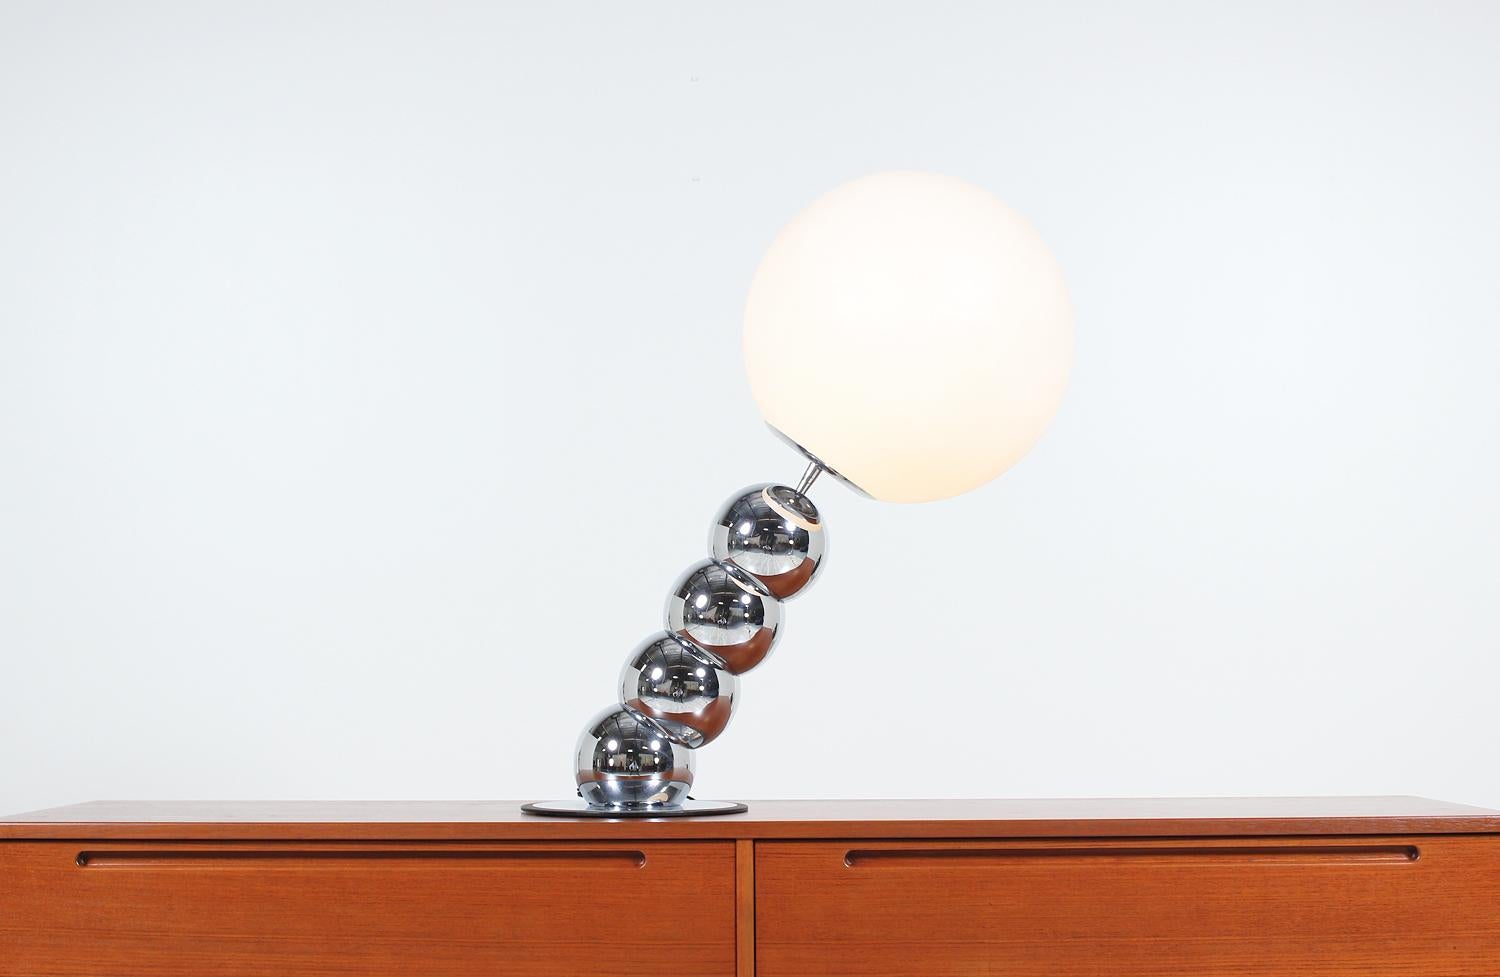 Amazing orb table lamp designed and manufactured by George Kovacs in the United States, circa 1970s. This unique lamp features four spheres that comprise the body, which are connected and slant. Set in chrome, the body supports the plastic orb shade